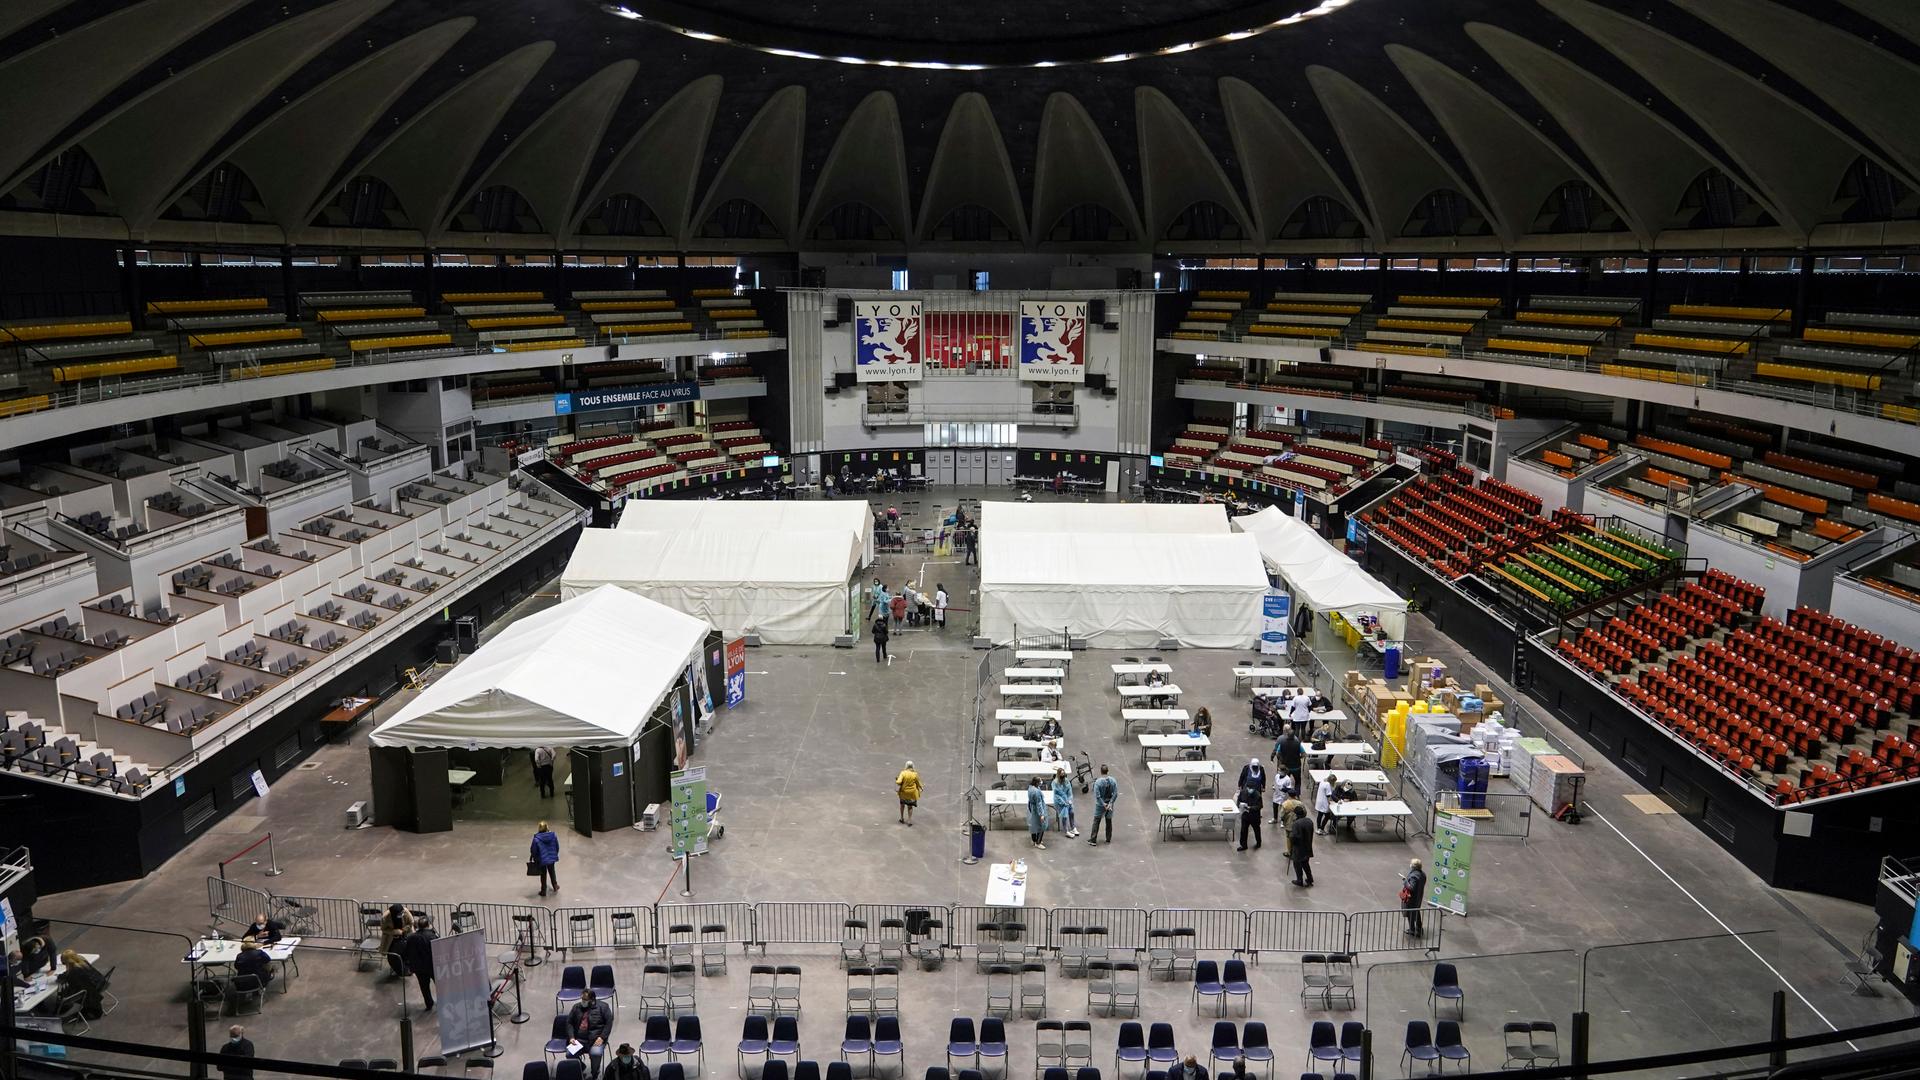 A stadium is set up as a vaccination drive site in France. 